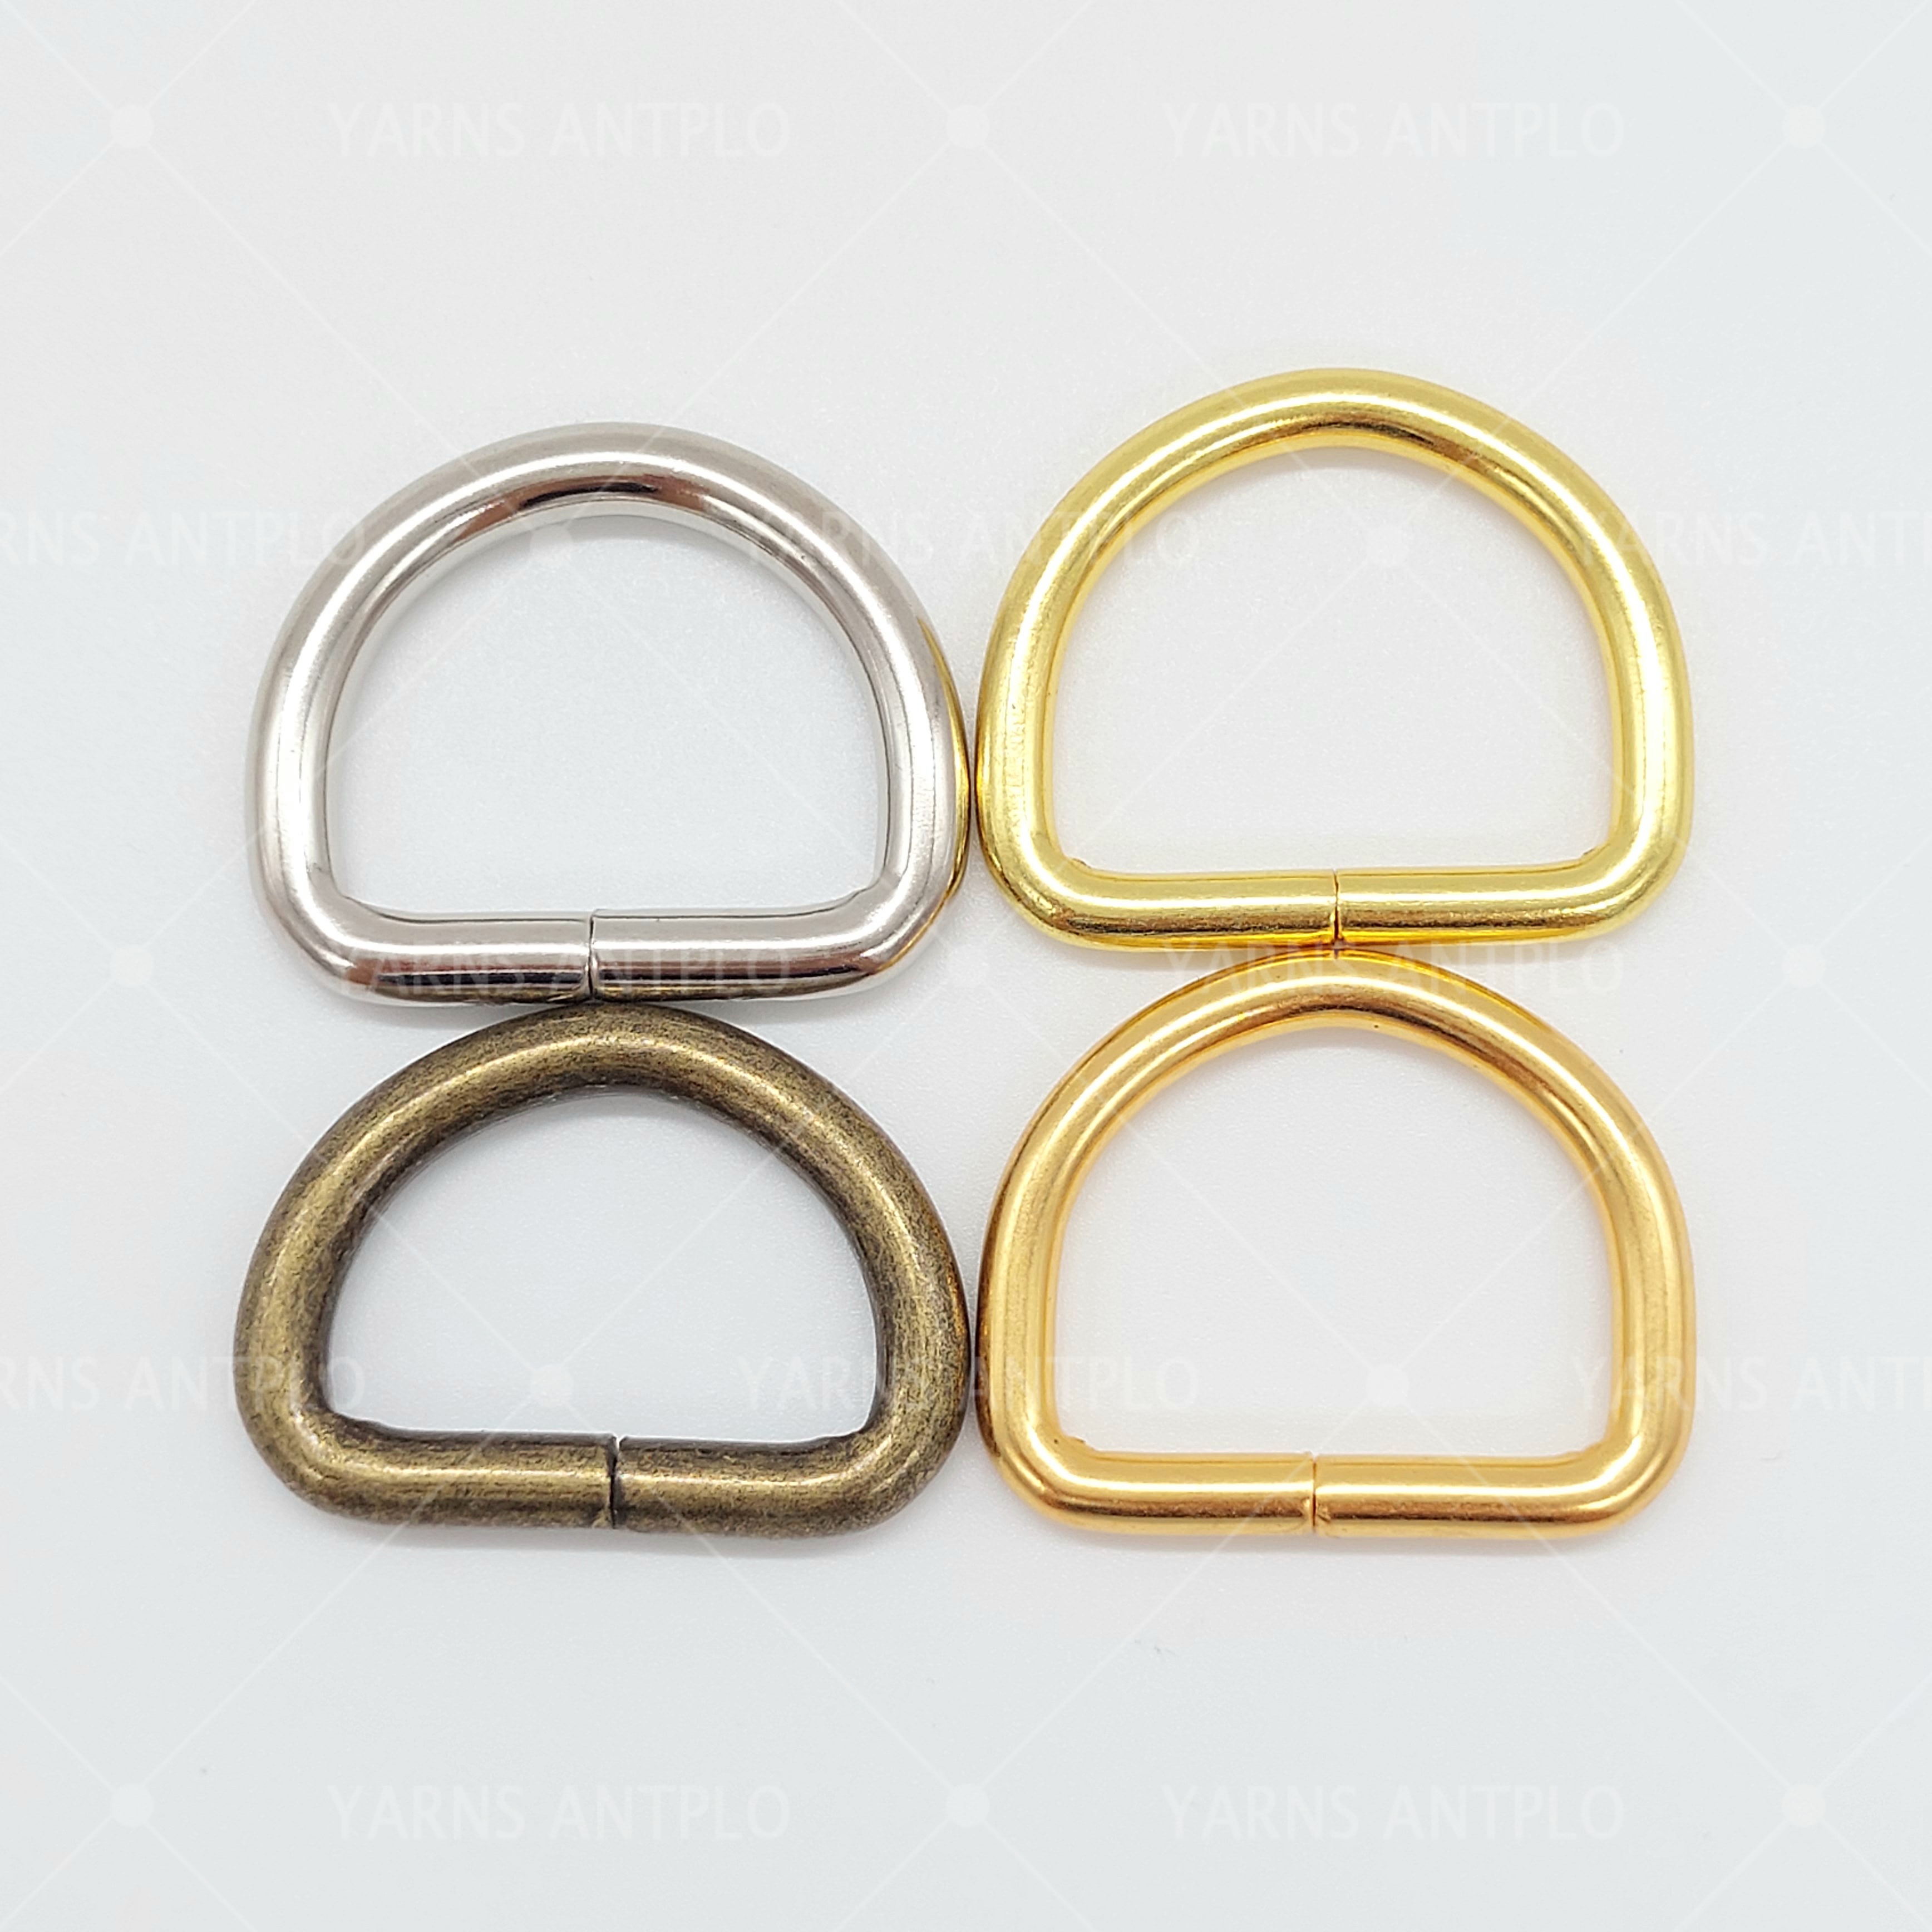 10 PCS, NON WELDED METAL D RING (THICK) 1 INCH INSIDE DIAMETER FOR BAGS  CRAFTS DIY